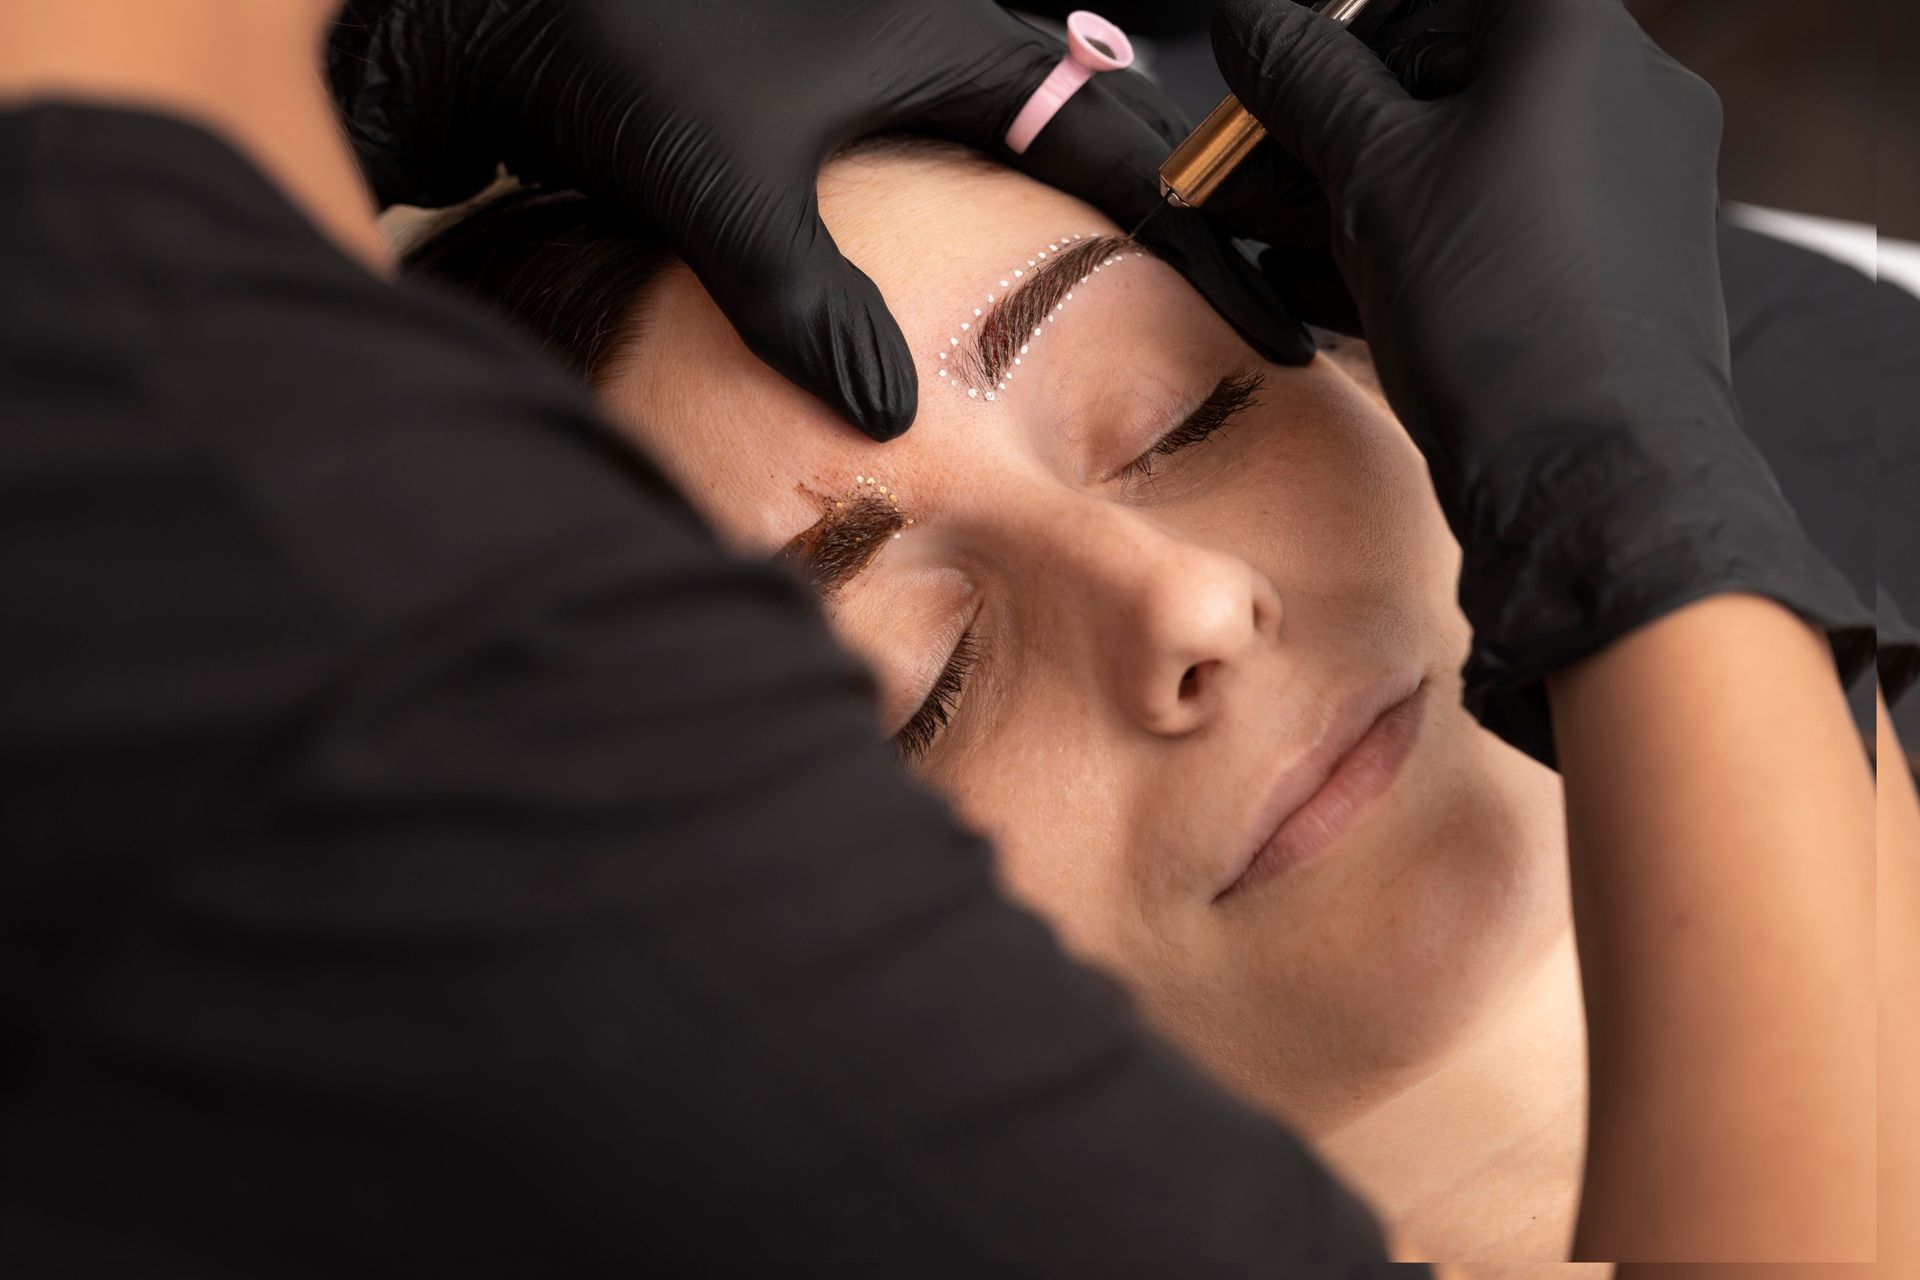 a woman is getting her eyebrows painted by a person wearing black gloves